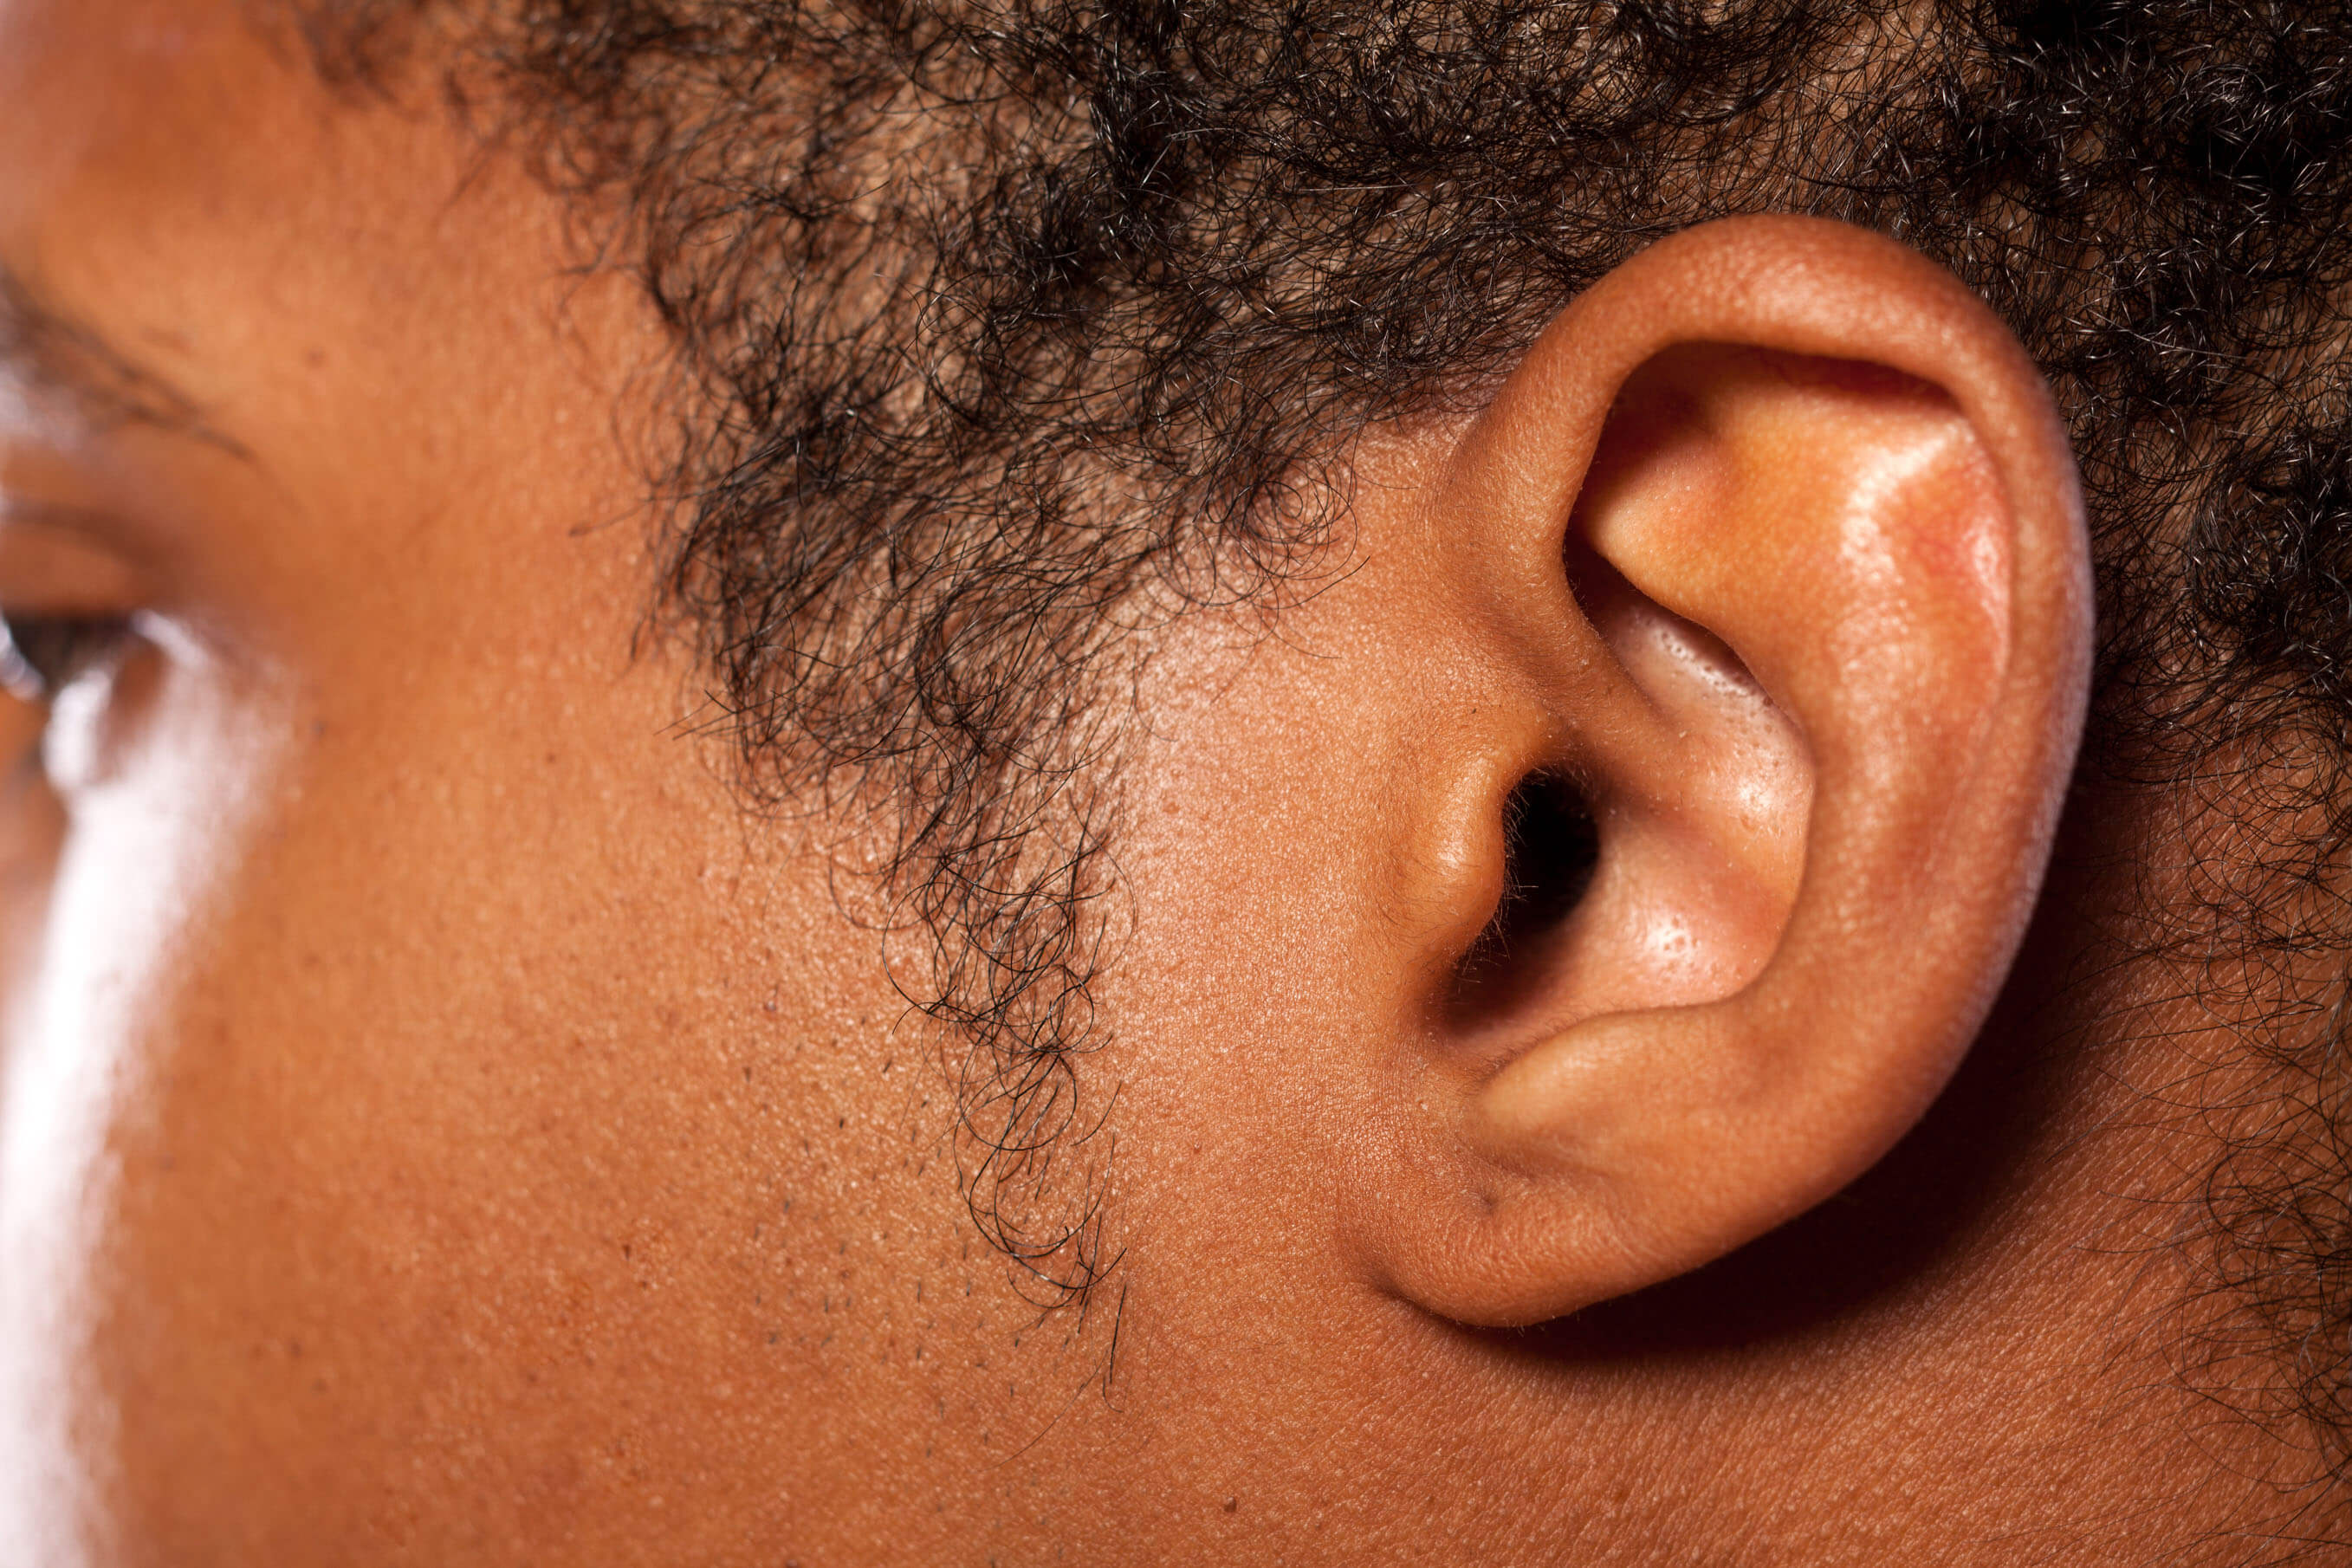 close up shot of the ear of a dark-skinned young man